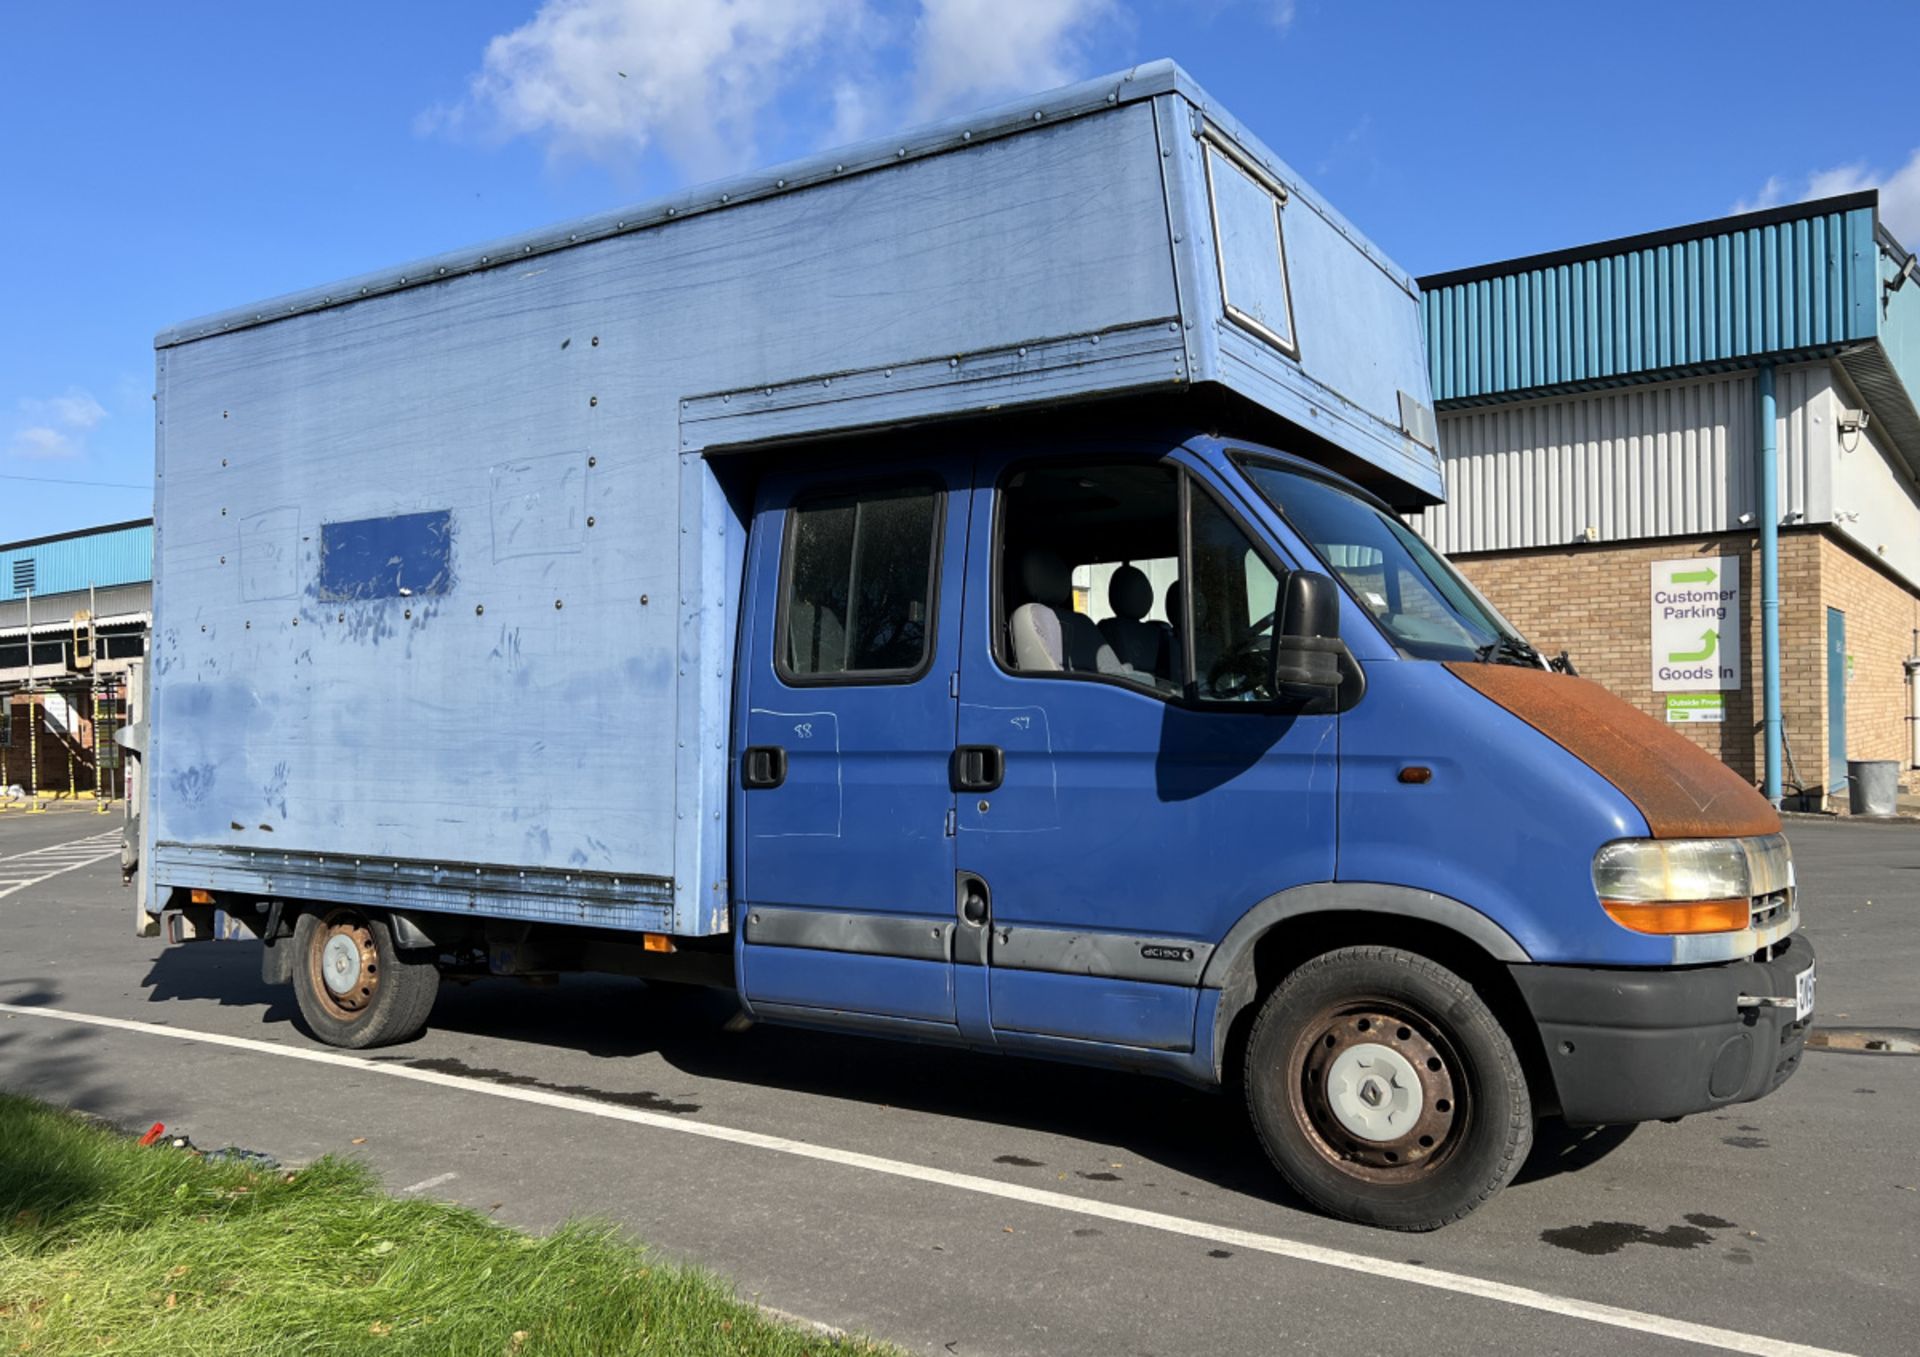 Renault Master LL35 DCI crew-cab Luton van with tail lift - 2.2L - diesel - MOT expired (see desc.) - Image 4 of 25